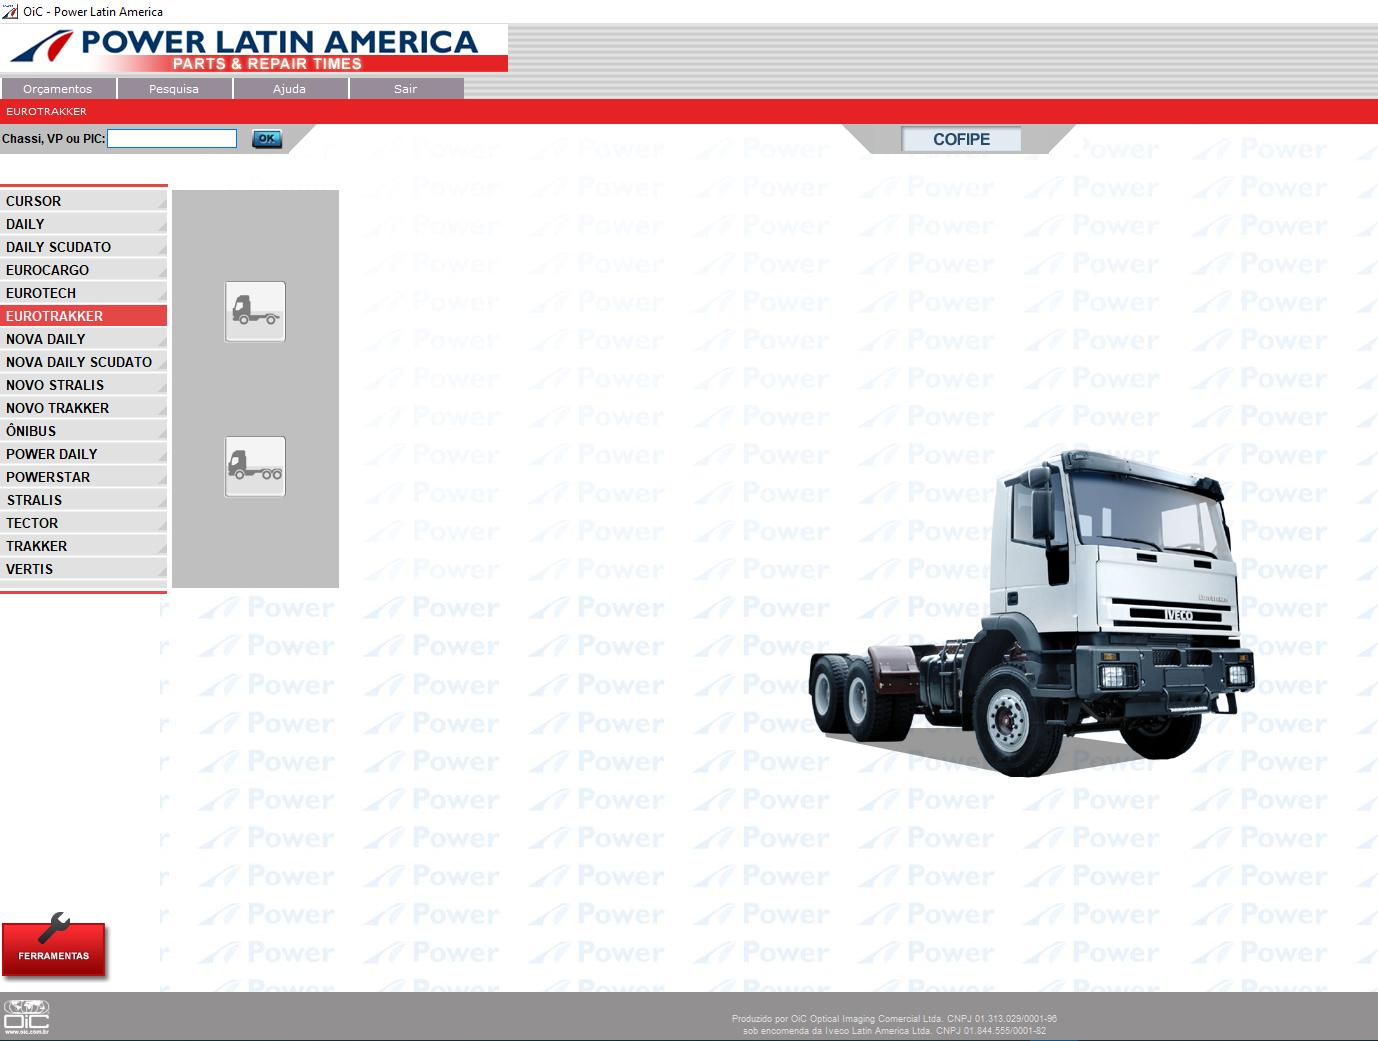 _VERIFIED_ SketchUp Pro 2020 20.0.363.0 Crack Activation Key Iveco_Power_Latin_America_OIC_032020_EPC_Spare_Parts_Catalog